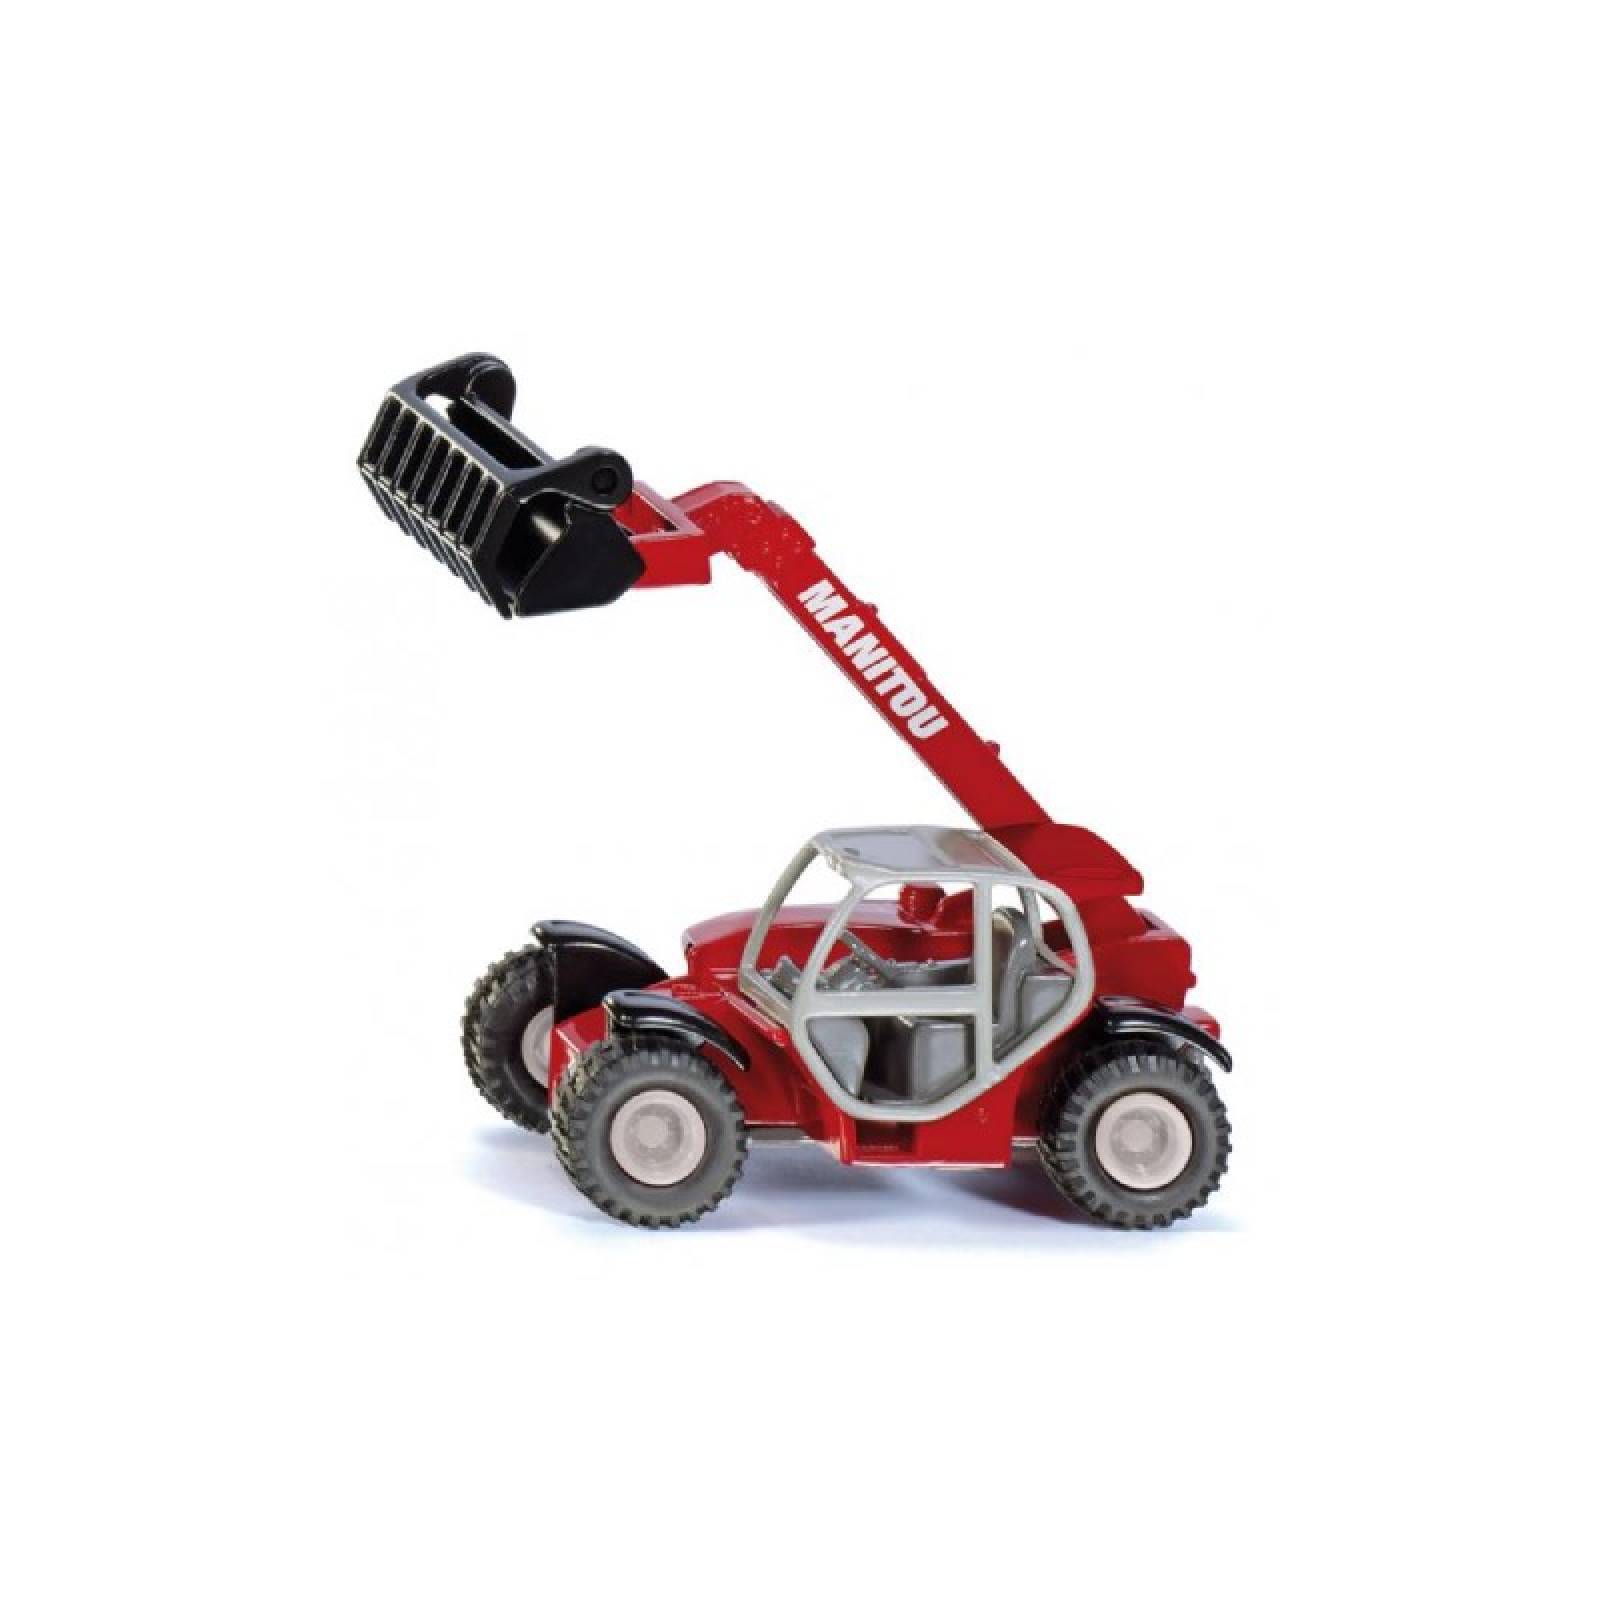 Manitou Telescopic Loader - Single Die-Cast Toy Vehicle 1482 3+